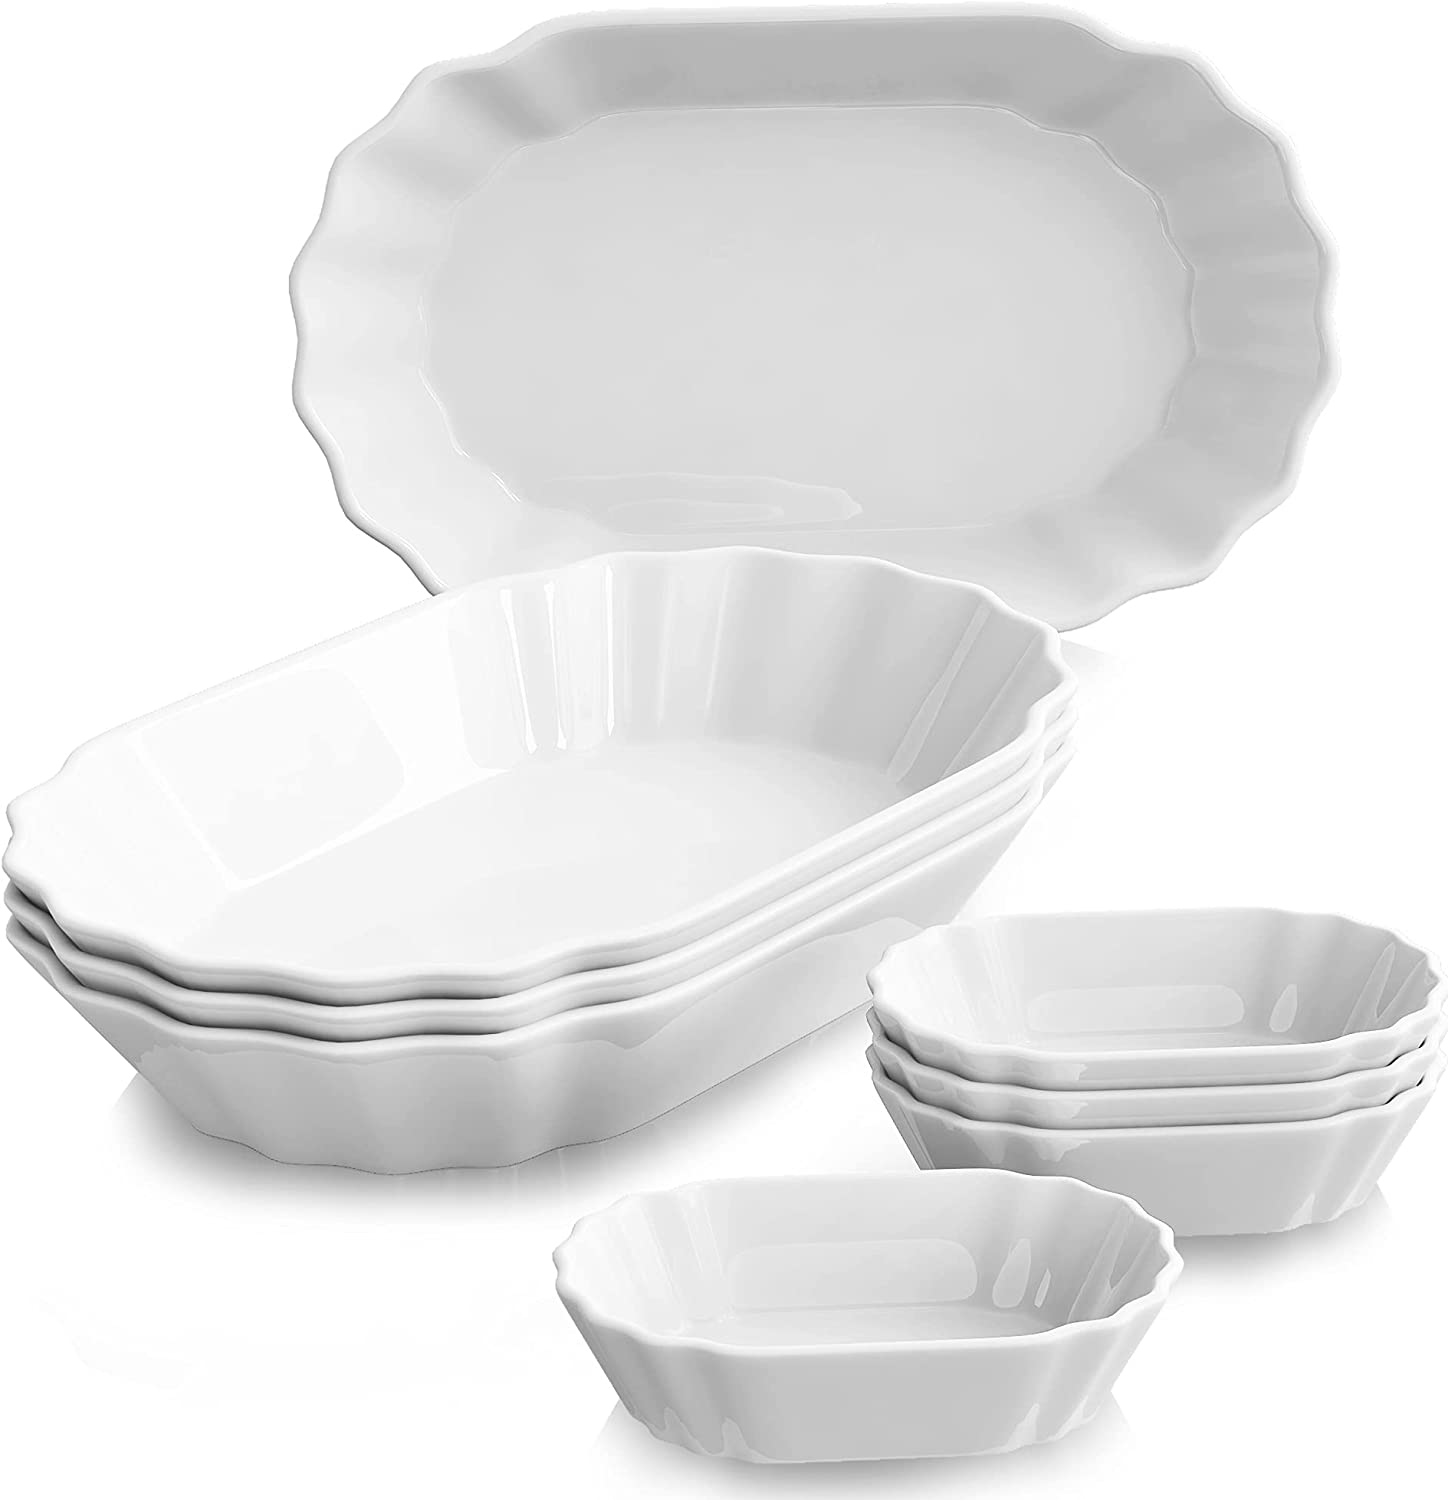 Malacasa Regular Series Porcelain Bowl for Chips and Snacks, Cutlery, A